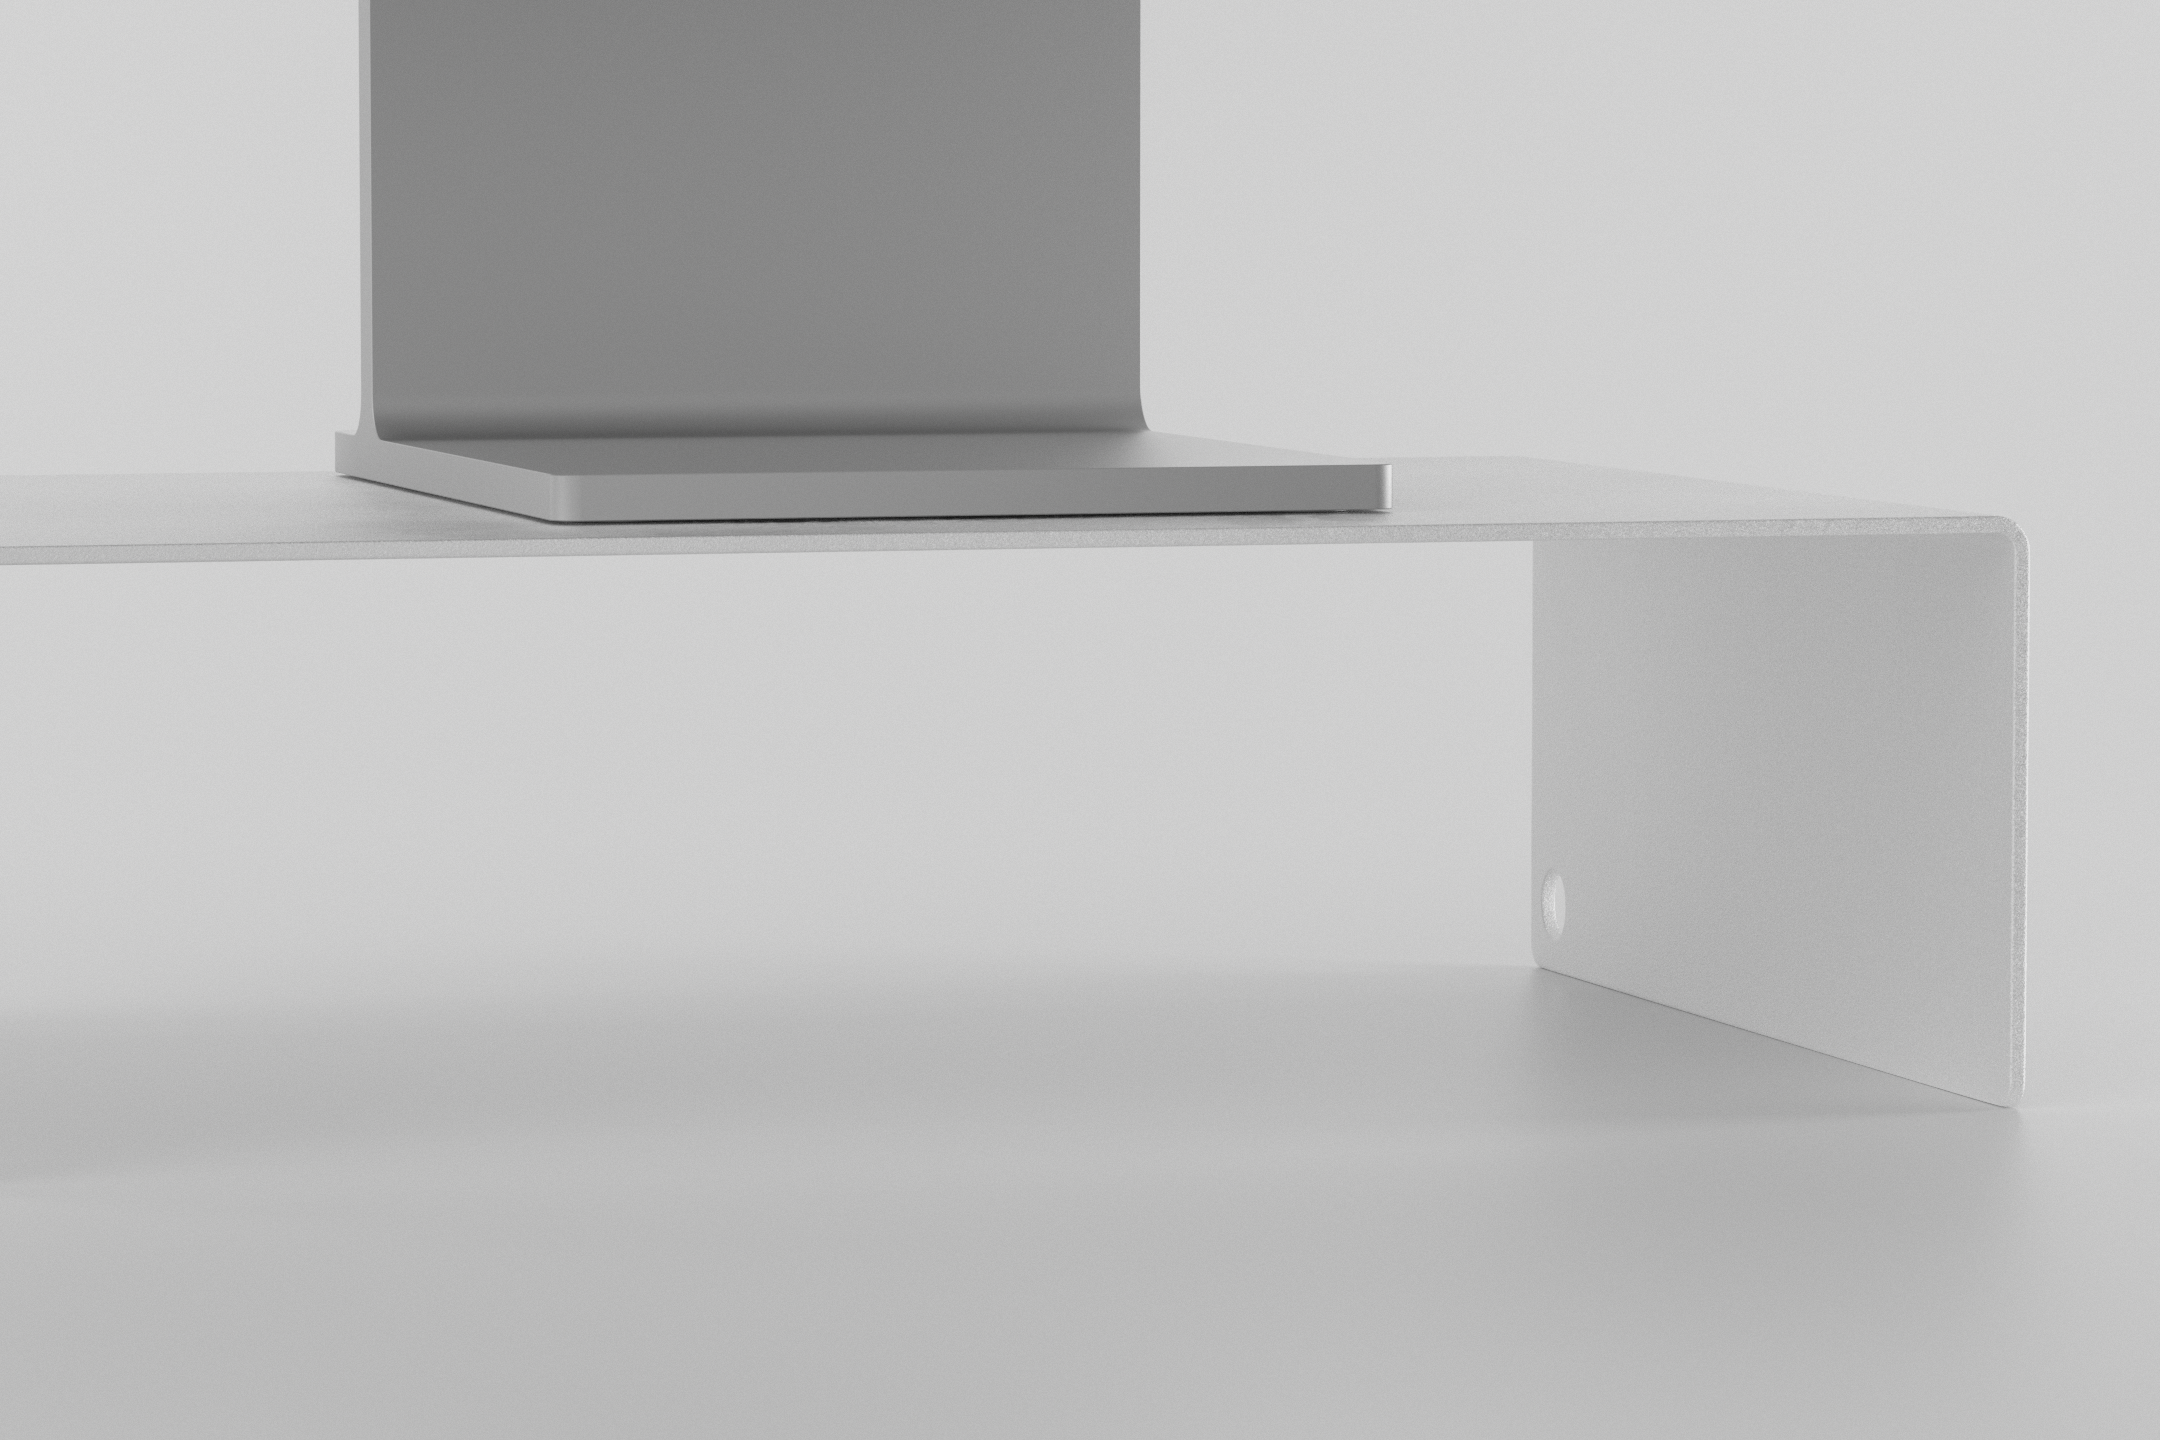 The Monitor Stand - white with display on it